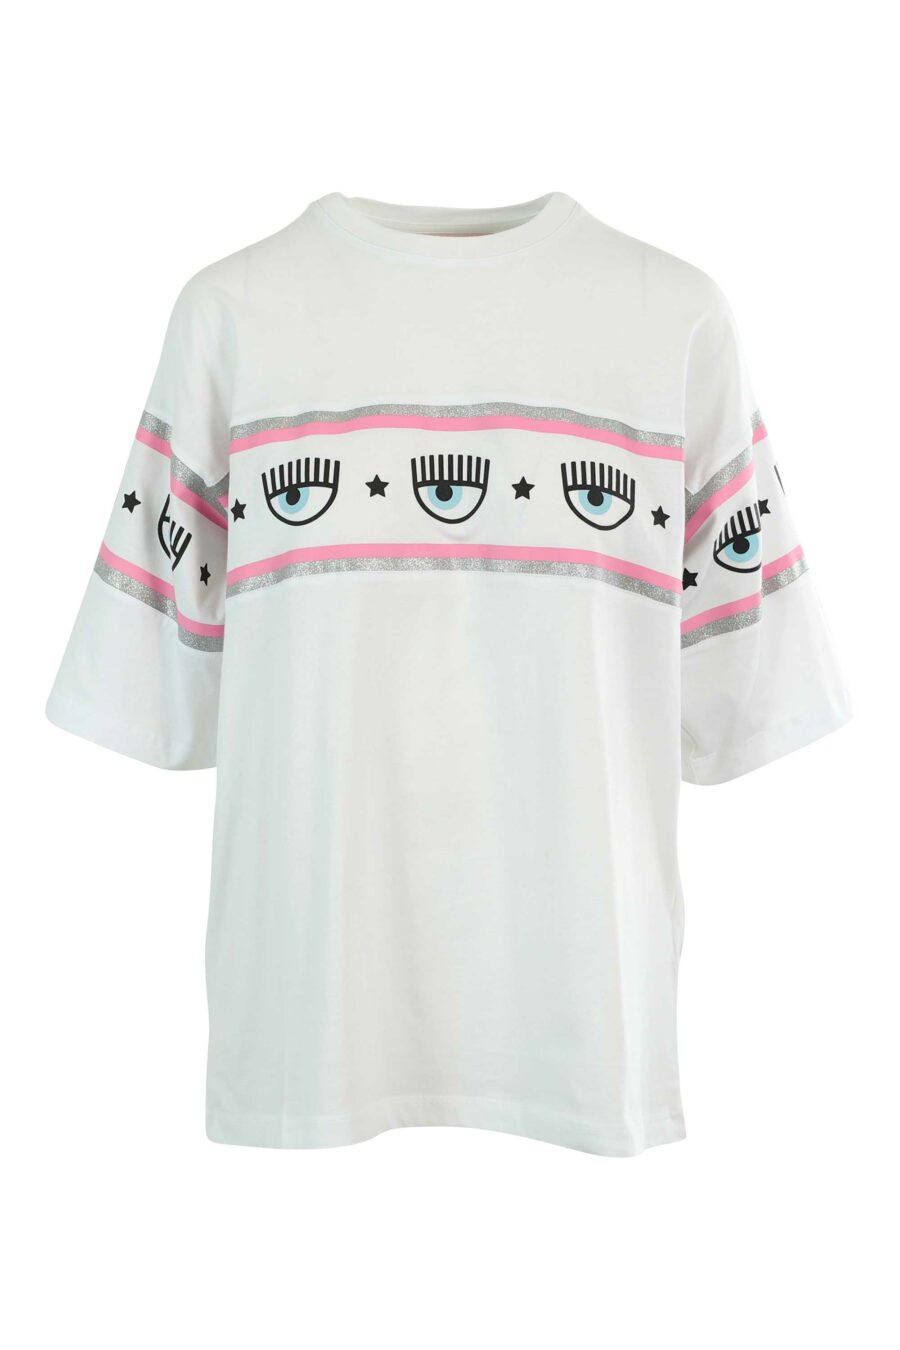 White wide sleeve T-shirt with eye logo on ribbon - 8052672419330